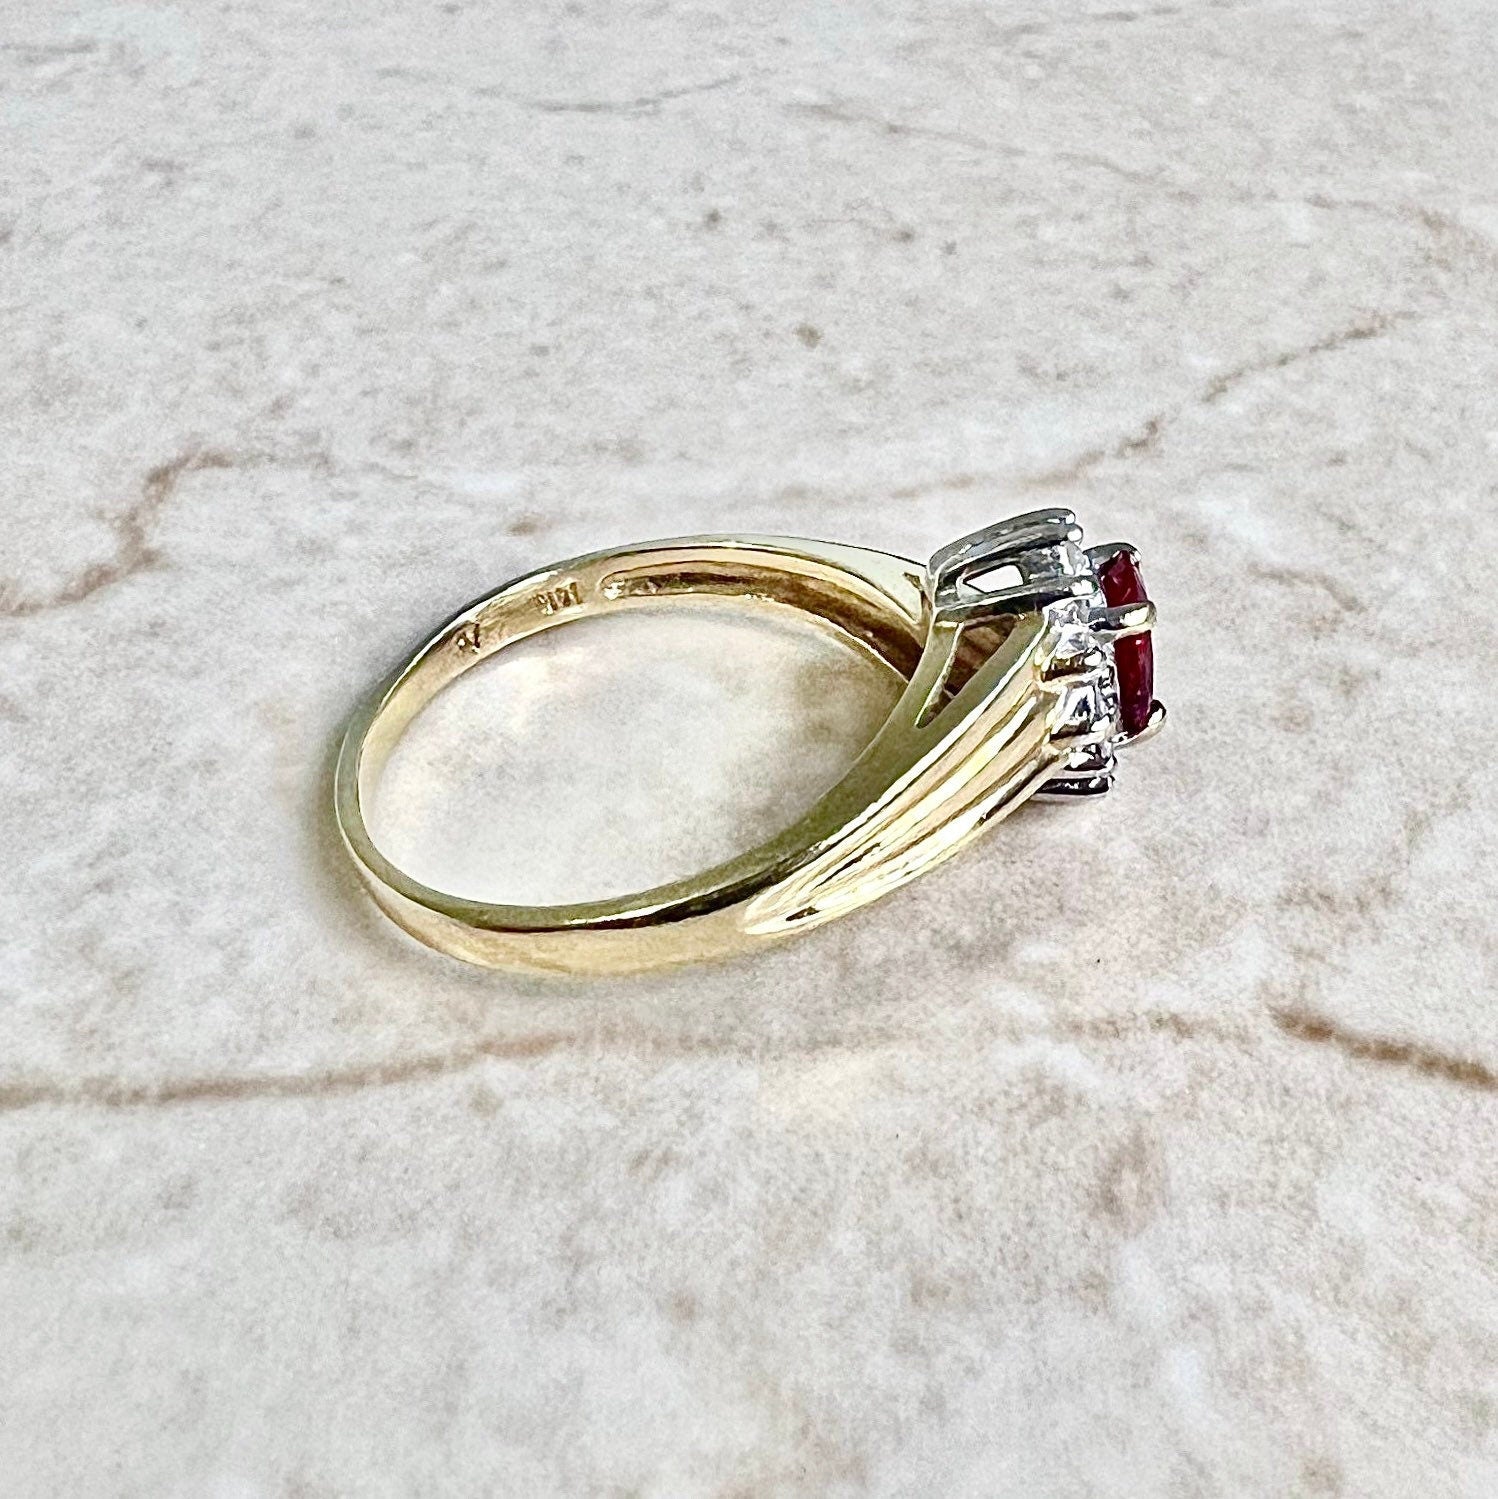 14K Vintage Ruby & Diamond Halo Ring - Gold Ruby Ring - Ruby Engagement Ring - Ruby Halo Ring -Cocktail Ring-Promise Ring-Best Gifts For Her